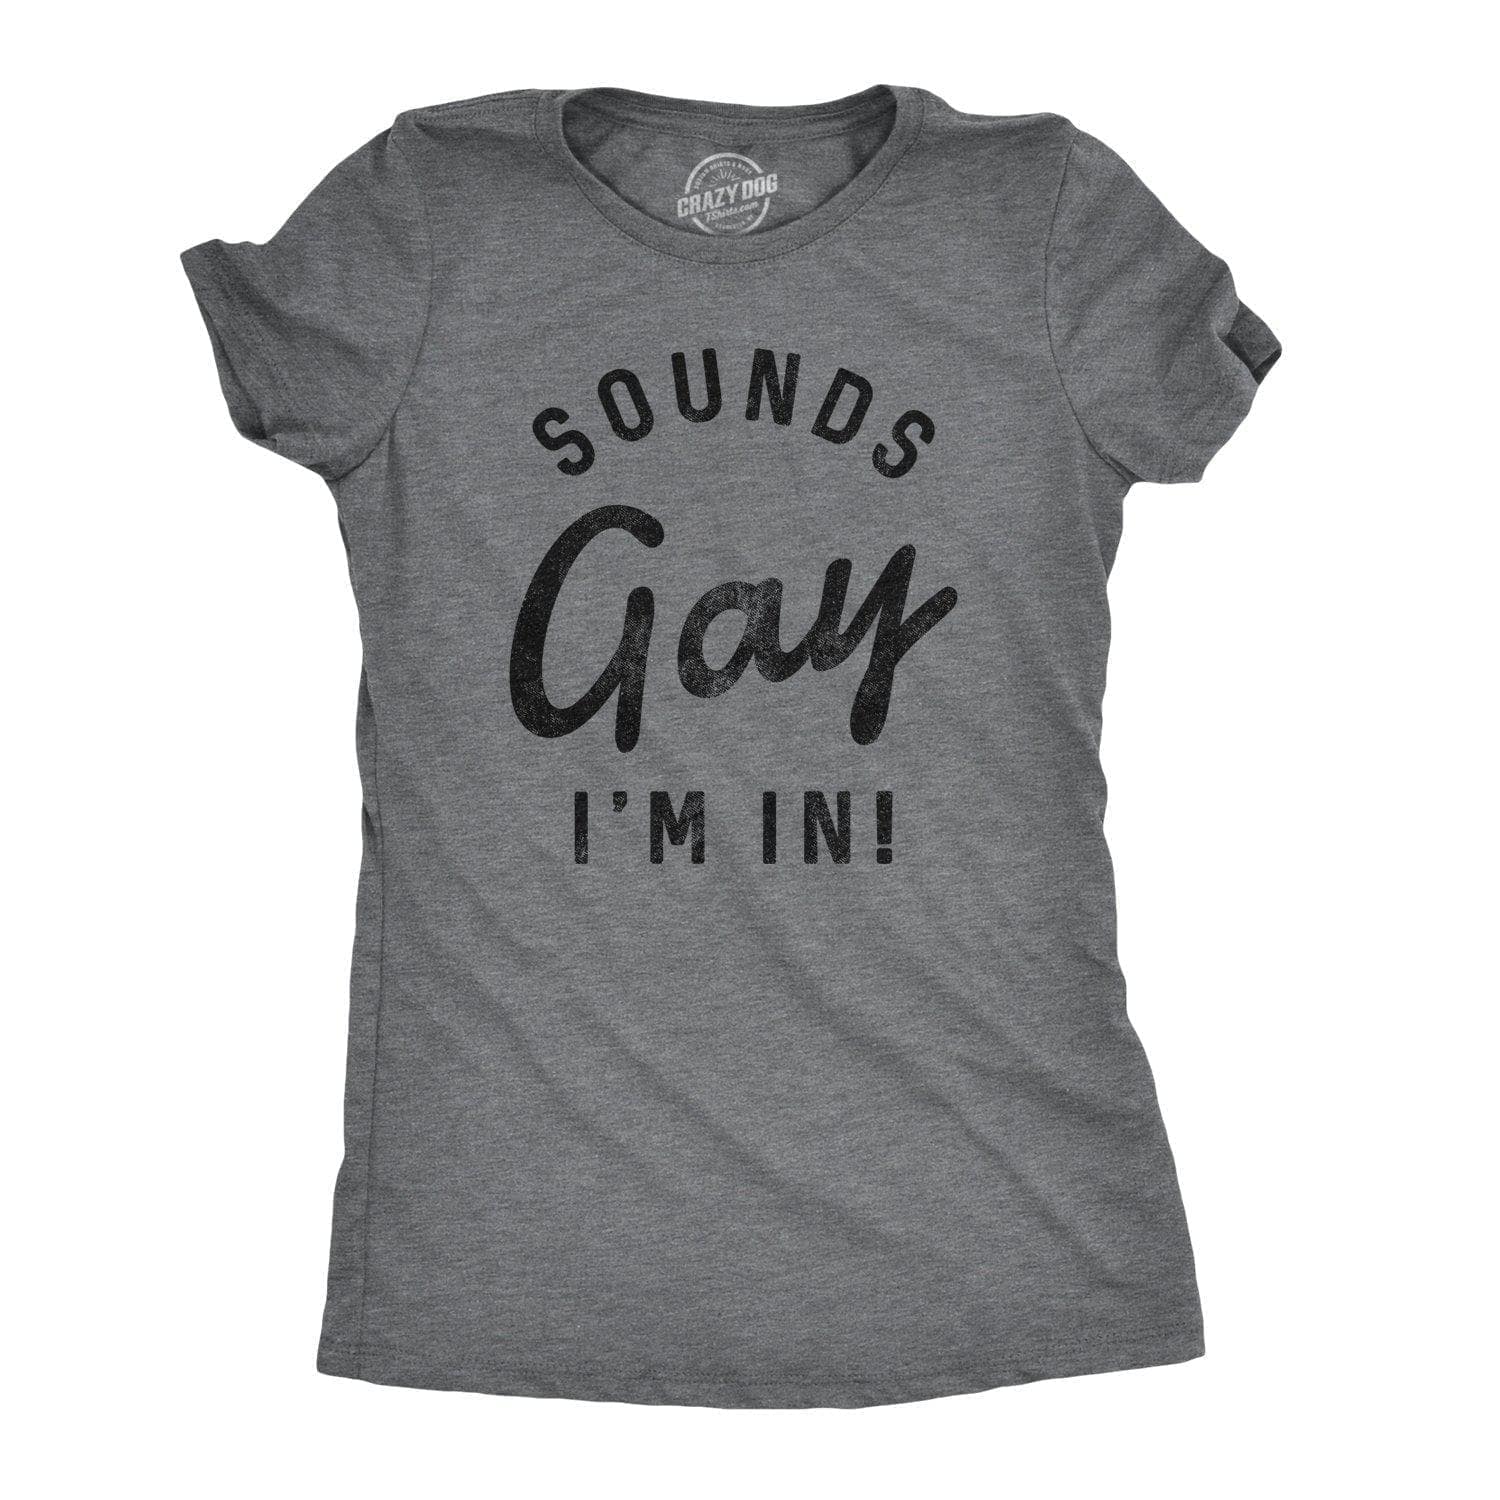 Sounds Gay I'm In Women's Tshirt - Crazy Dog T-Shirts